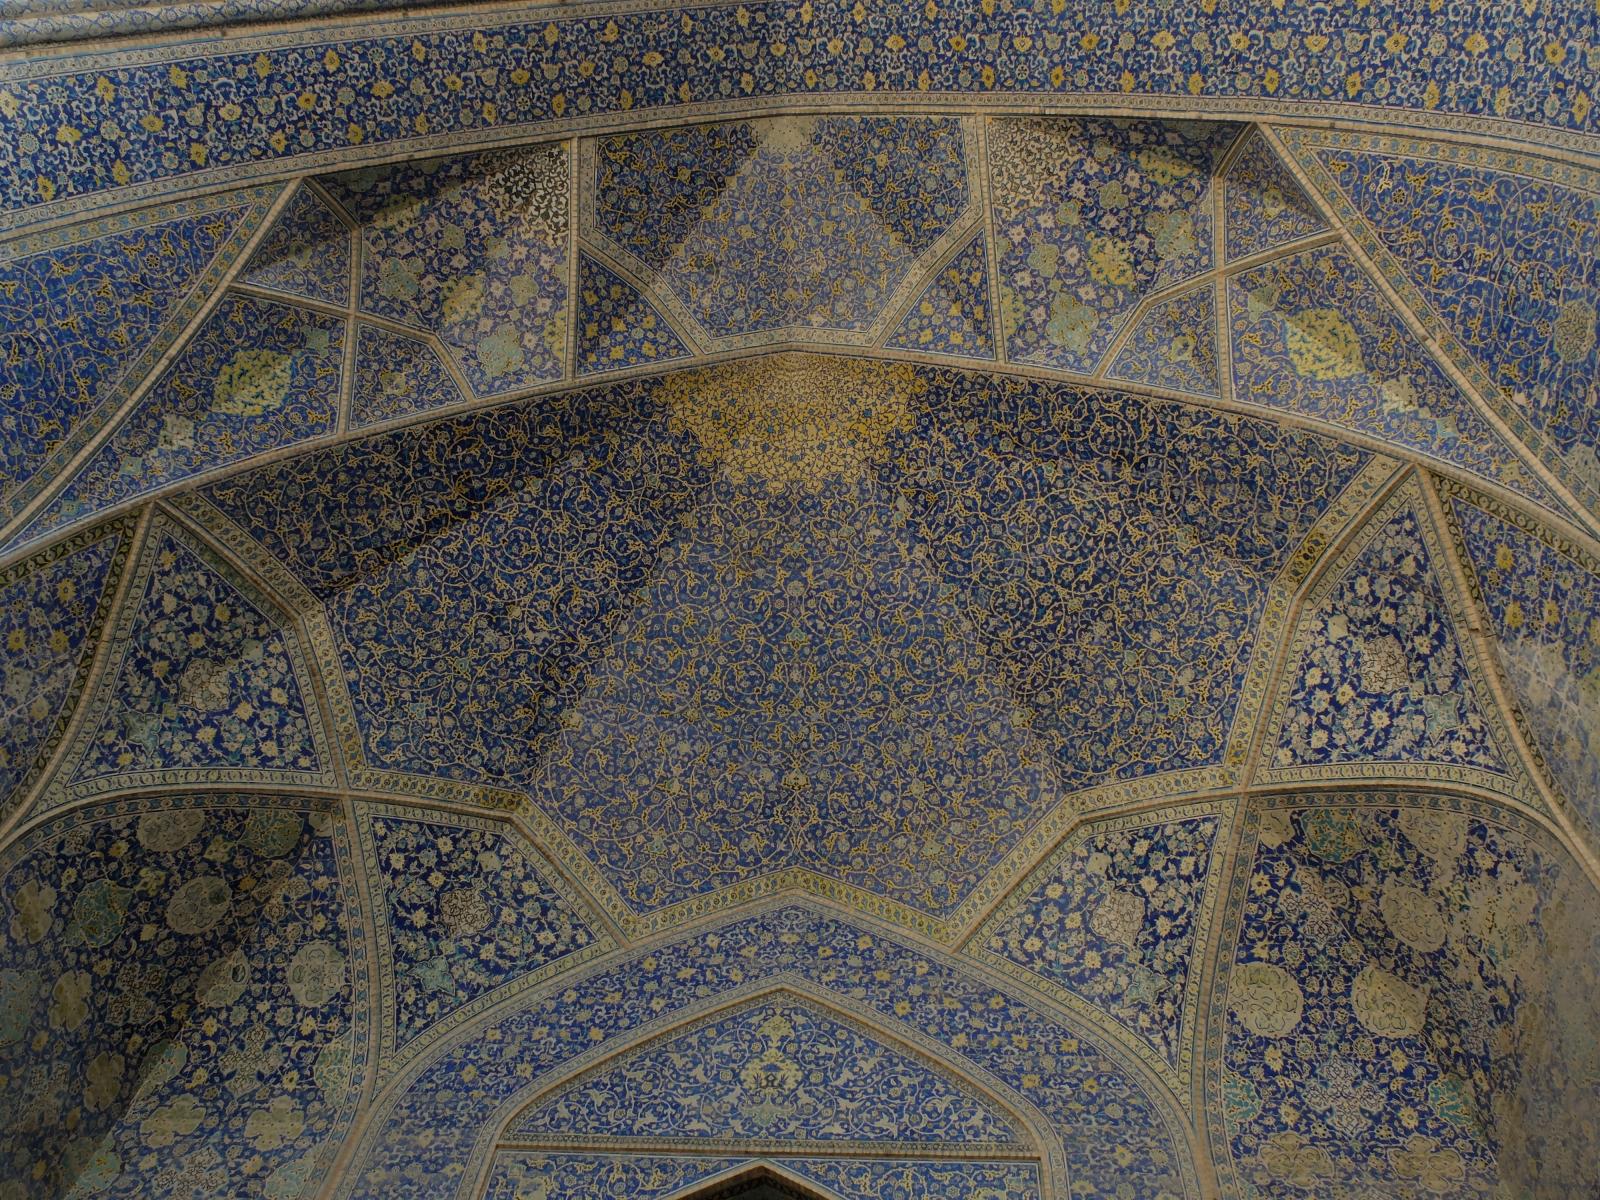 a blue decorative stone and mosaic design at the entrance to the great mosque